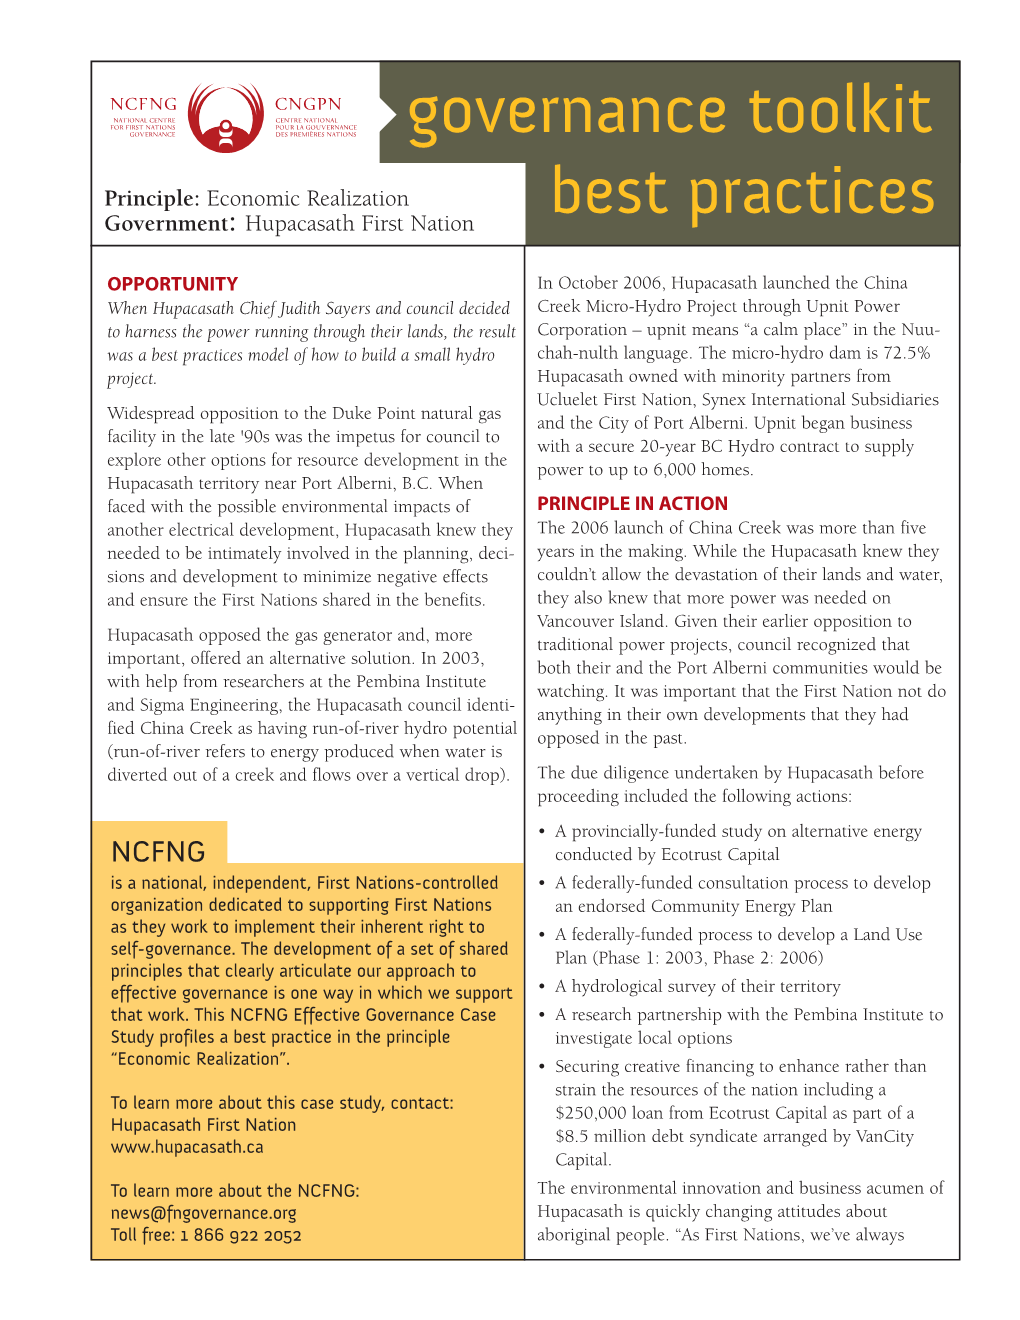 Hupacasath First Nation Best Practices